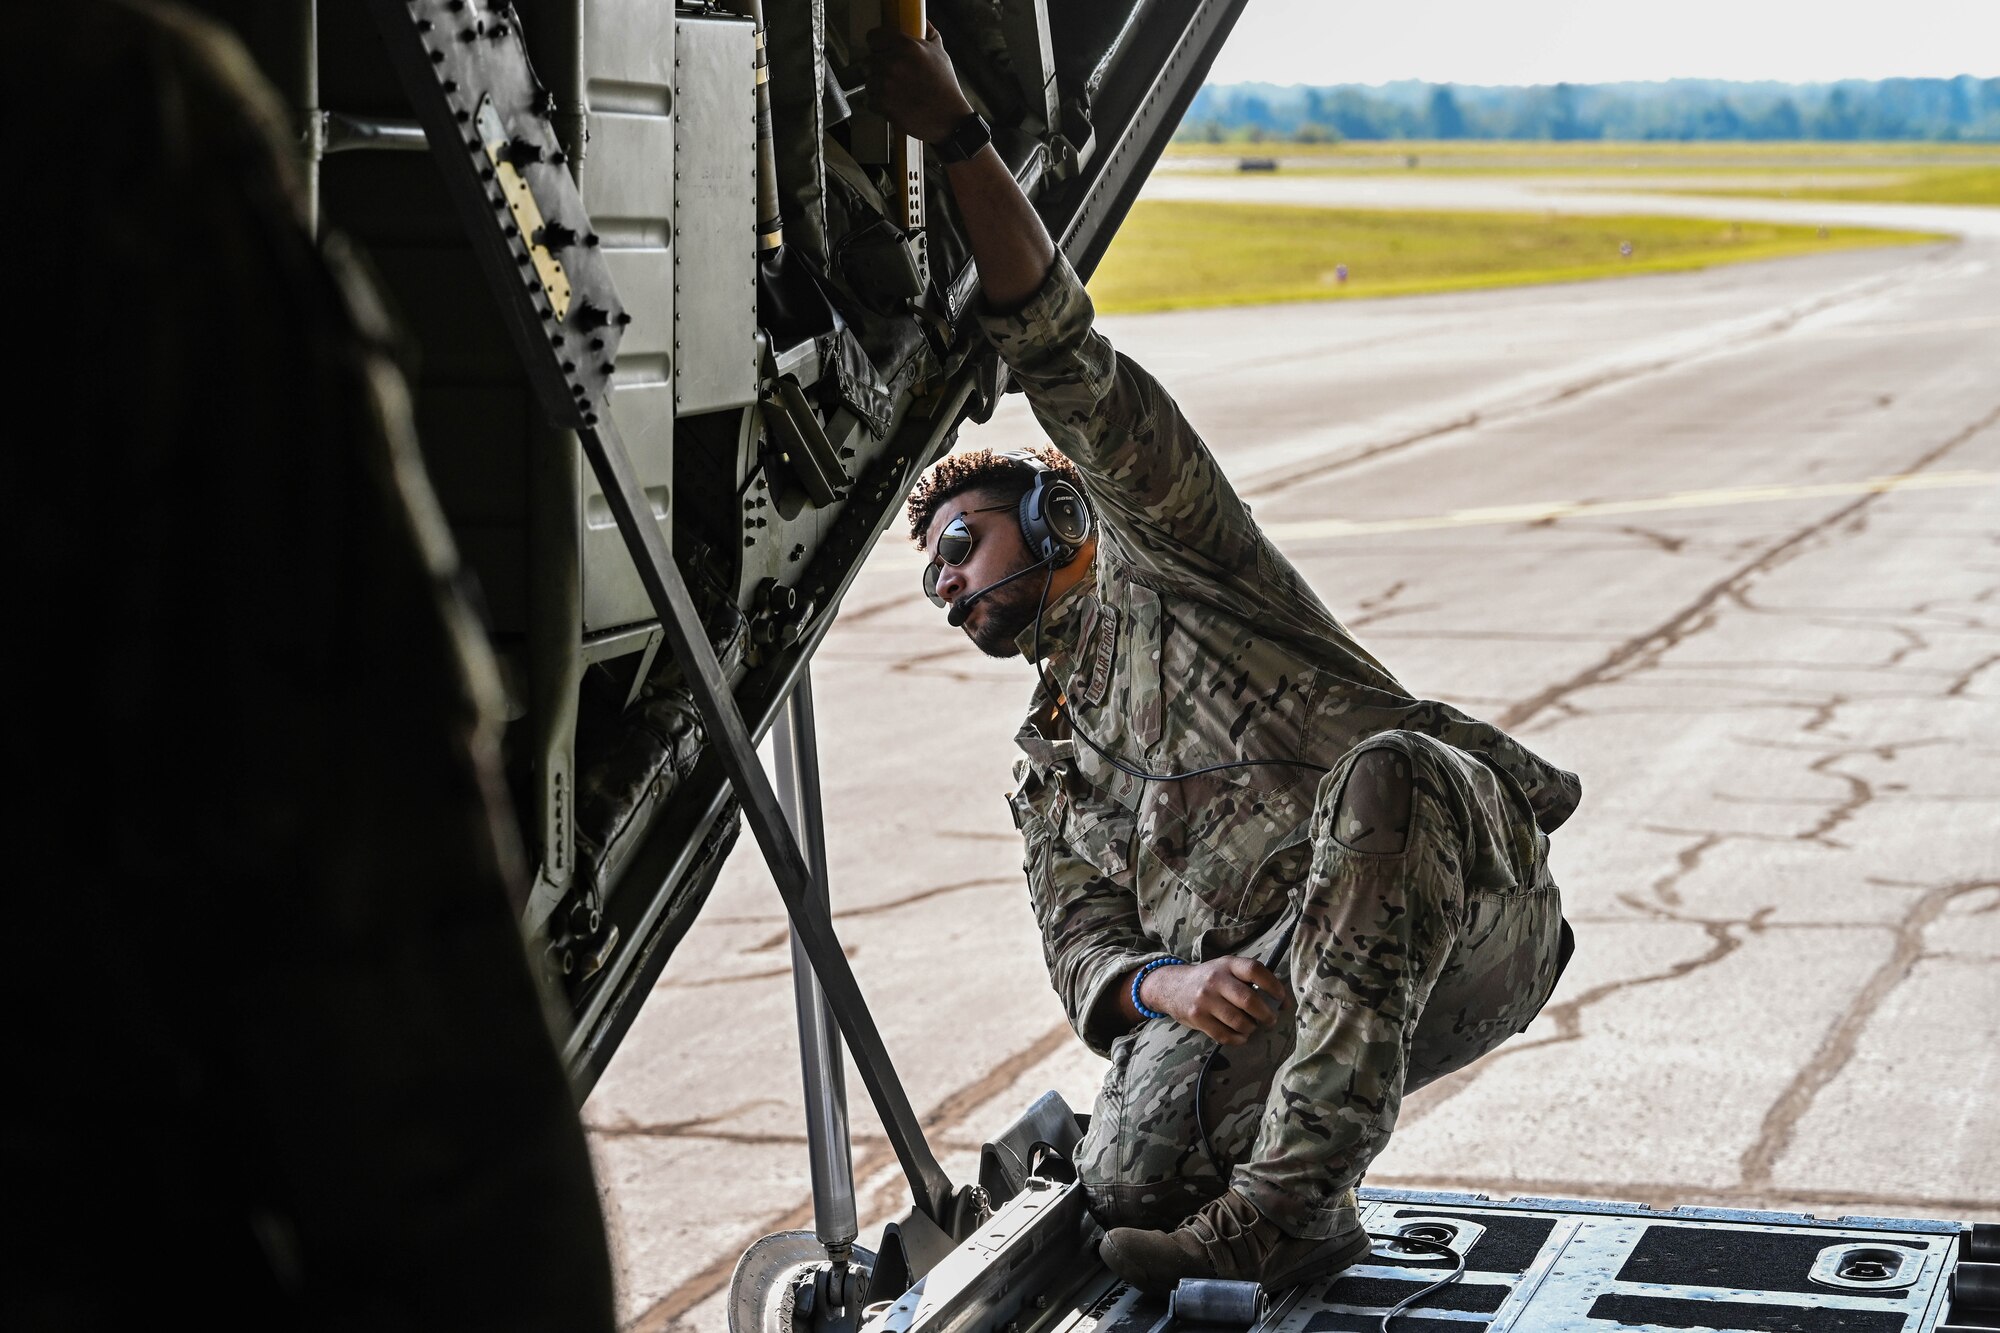 An Airman looks out the back of an aircraft.